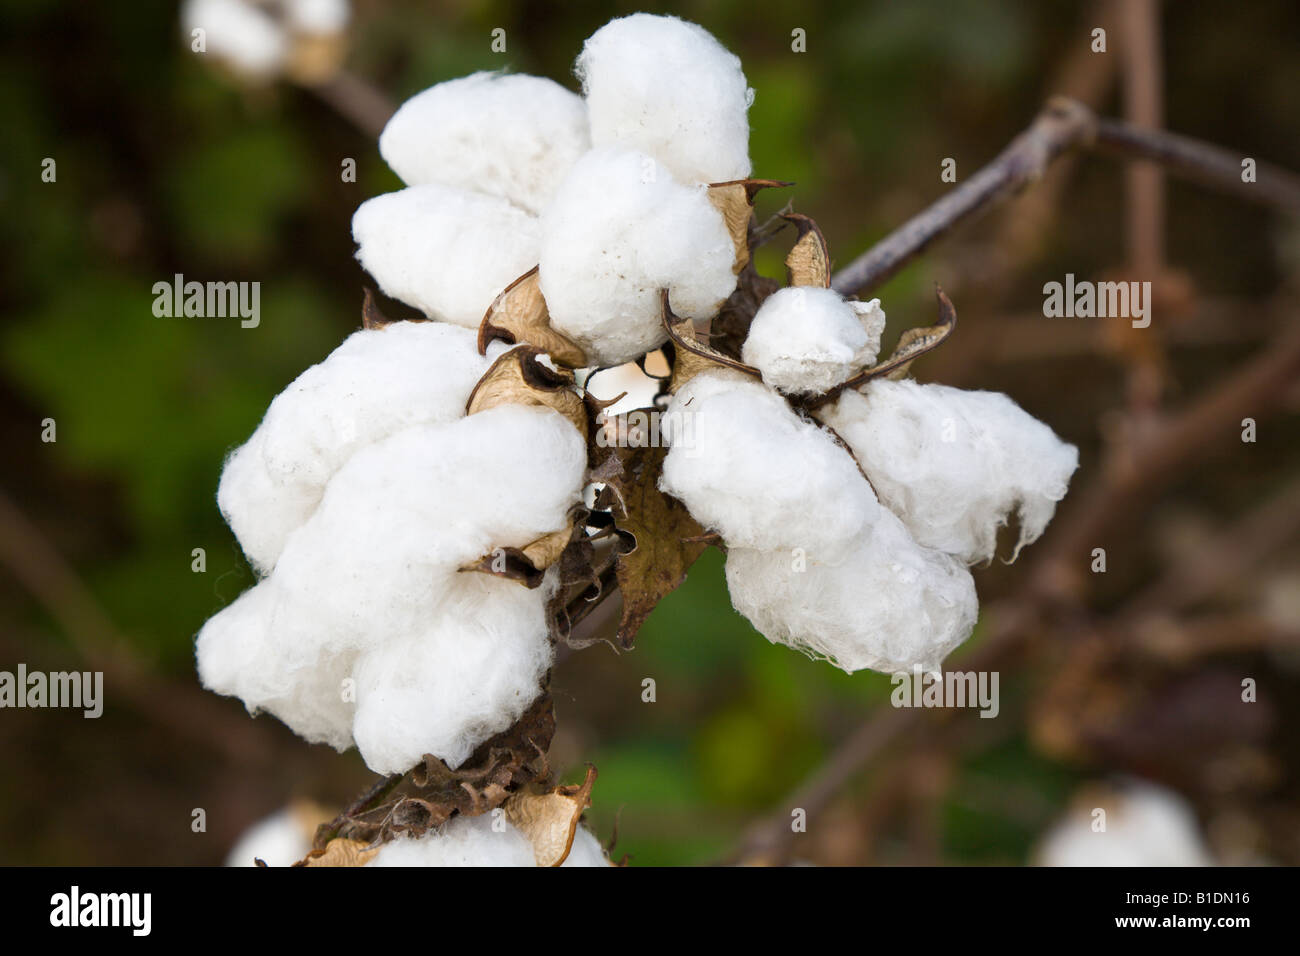 Cotton plant ready for picking in central Georgia, USA Stock Photo